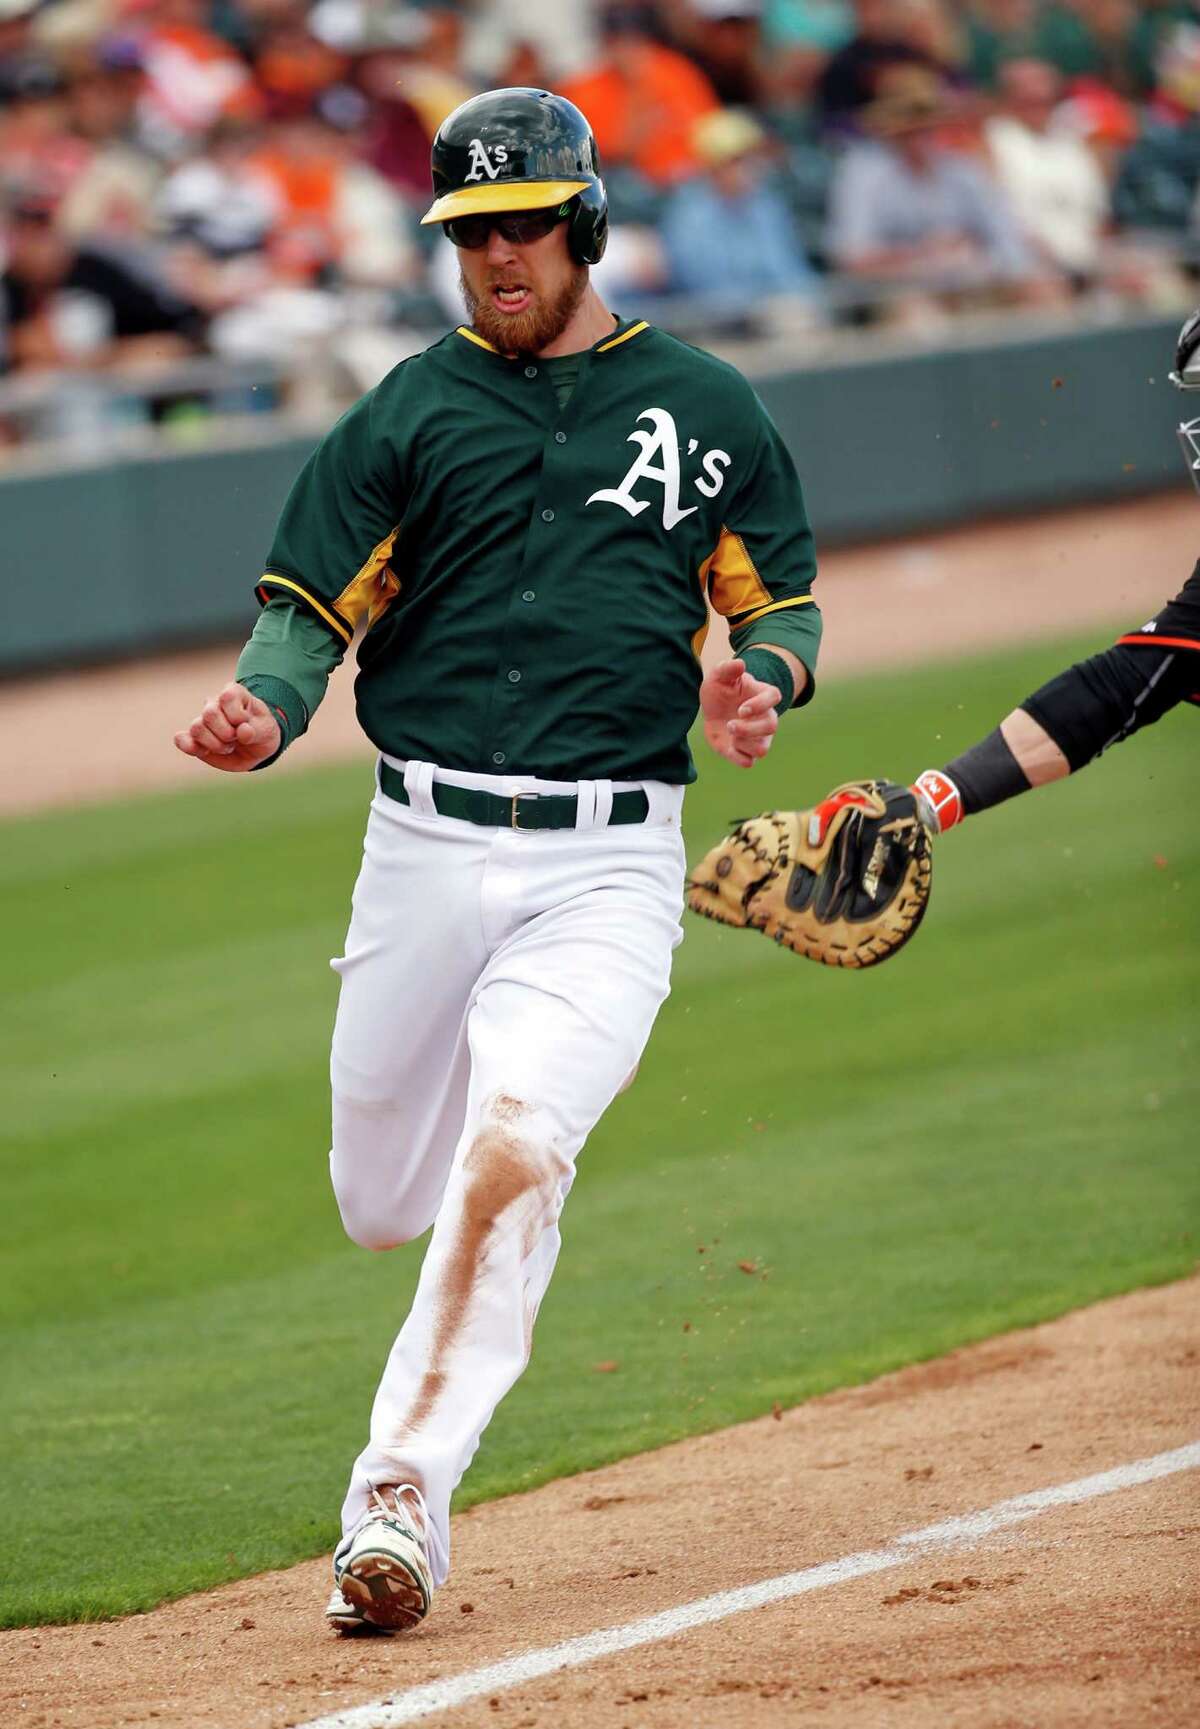 Left, A’s super utility man Ben Zobrist scores on Billy Butler’s sacrifice fly in their Cactus League opener against the Giants last month. The A’s top three projected power hitters combined for 32 home runs last season.